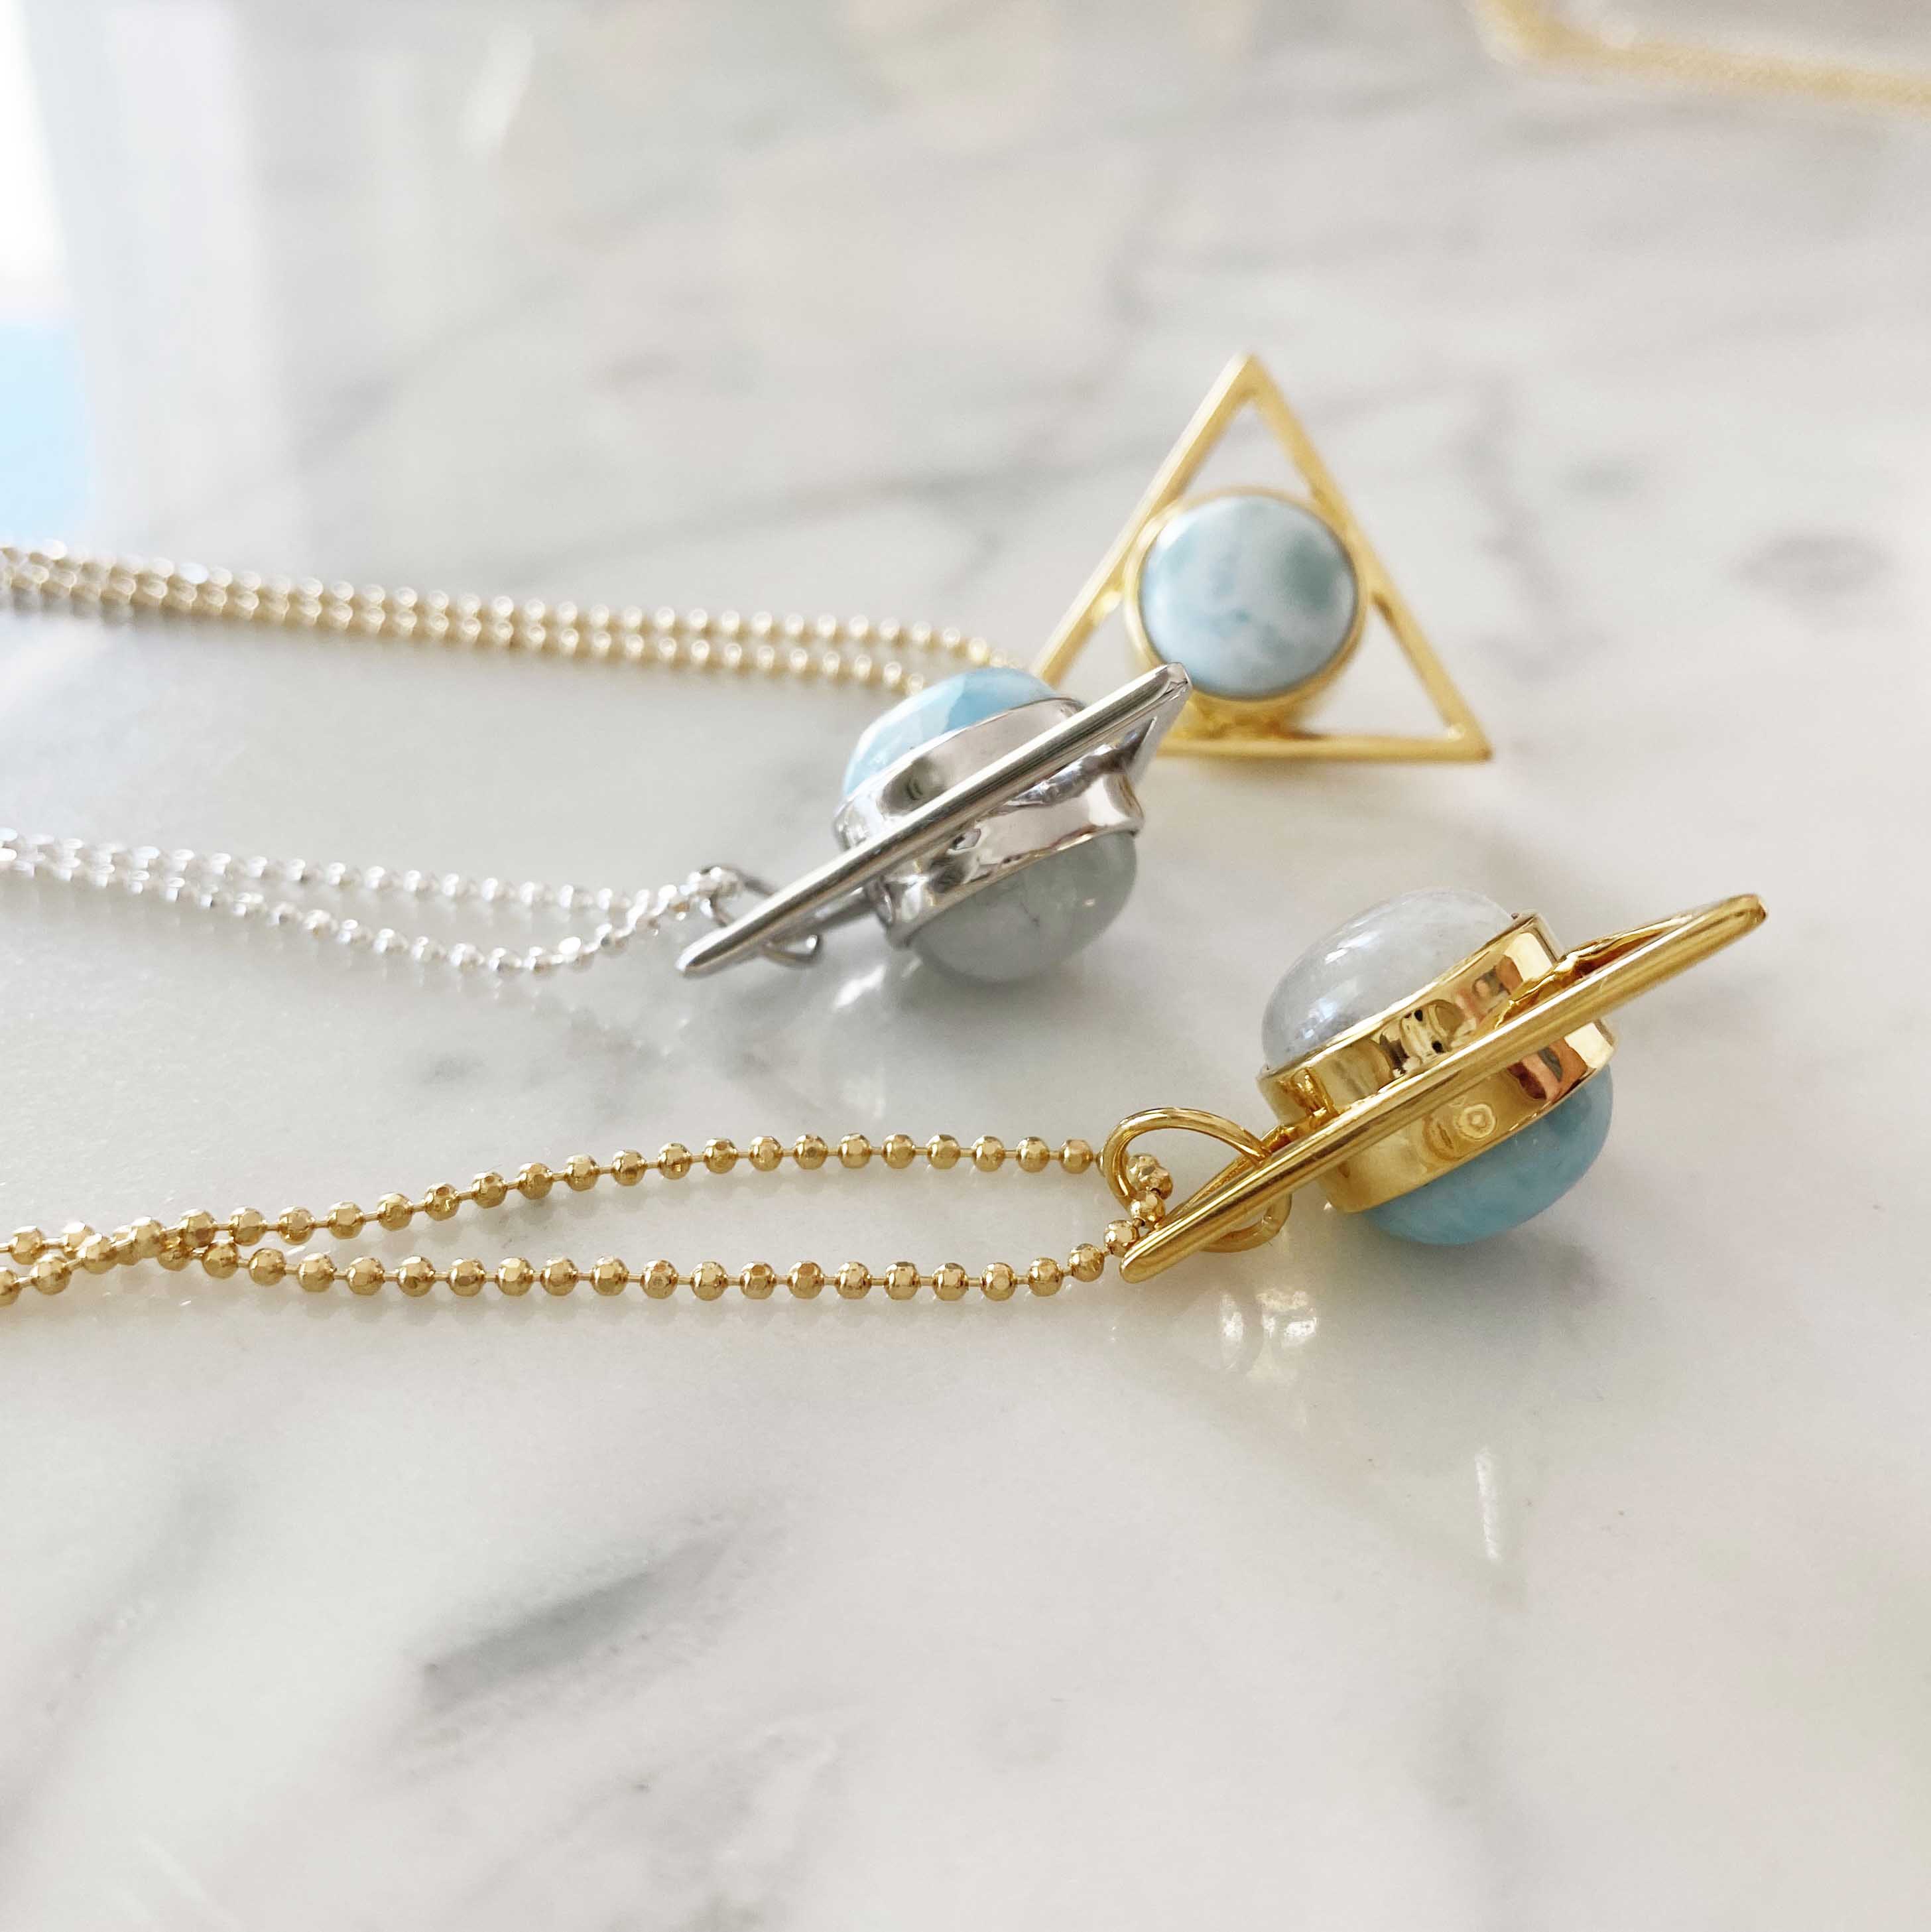 Larimar Drop Necklace - Sterling Silver or Gold Filled | Little Rock Collection Sterling Silver